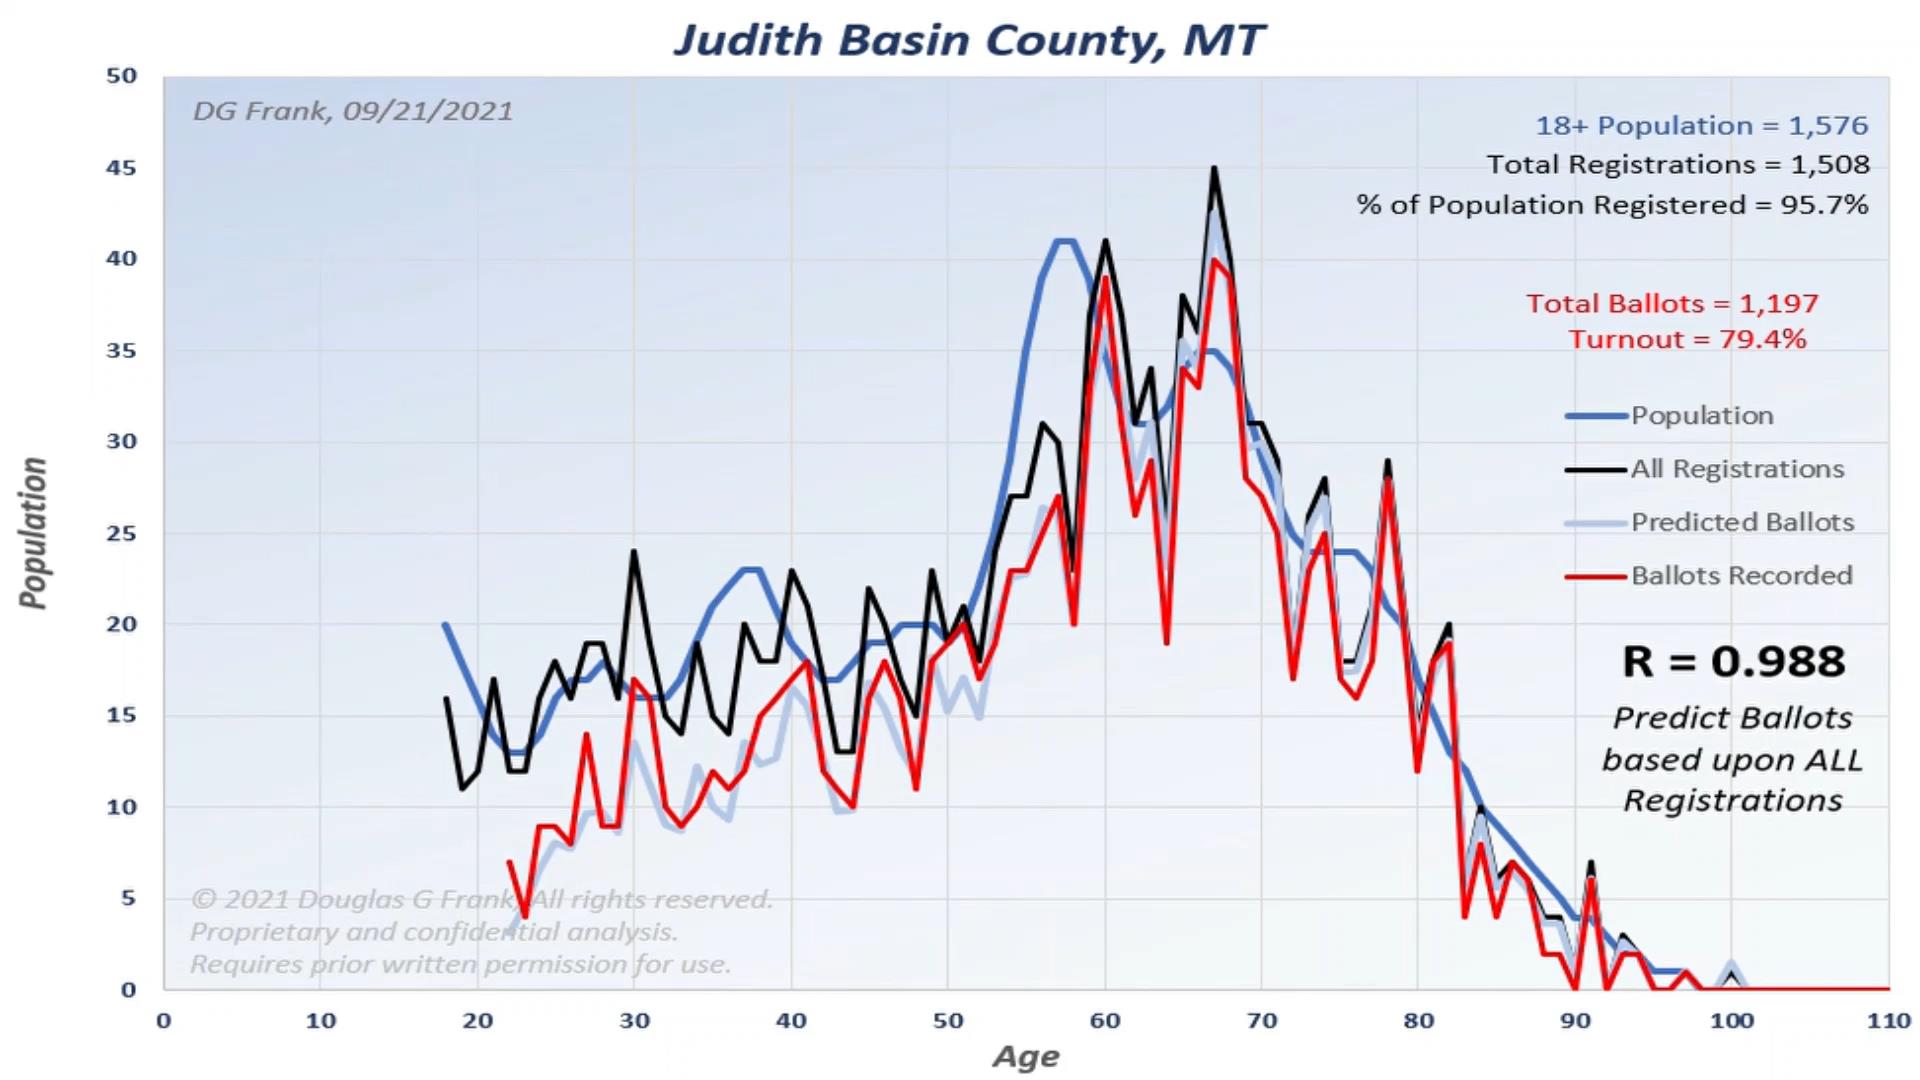 Judith Basin County 2020 Election Analysis Chart by Dr. Doug Frank